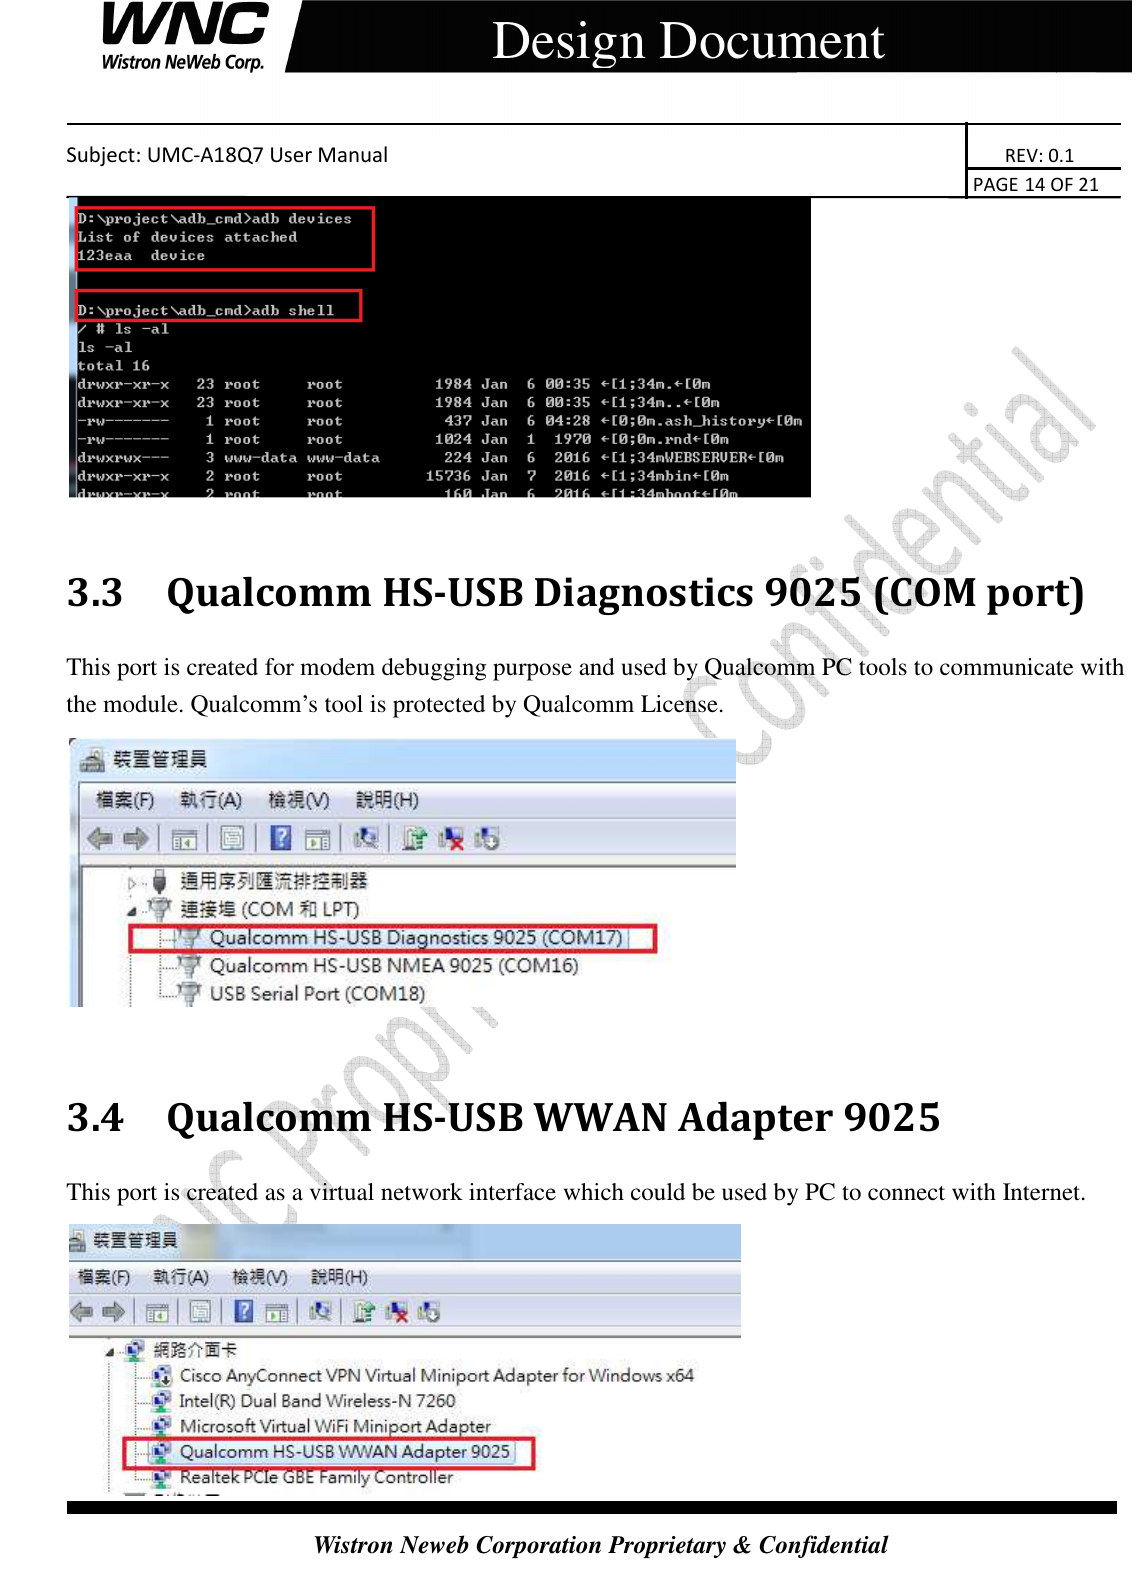    Subject: UMC-A18Q7 User Manual                                                                       REV: 0.1                                                                                                                                                                               PAGE 14 OF 21  Wistron Neweb Corporation Proprietary &amp; Confidential     Design Document   3.3 Qualcomm HS-USB Diagnostics 9025 (COM port) This port is created for modem debugging purpose and used by Qualcomm PC tools to communicate with the module. Qualcomm’s tool is protected by Qualcomm License.   3.4 Qualcomm HS-USB WWAN Adapter 9025 This port is created as a virtual network interface which could be used by PC to connect with Internet.  